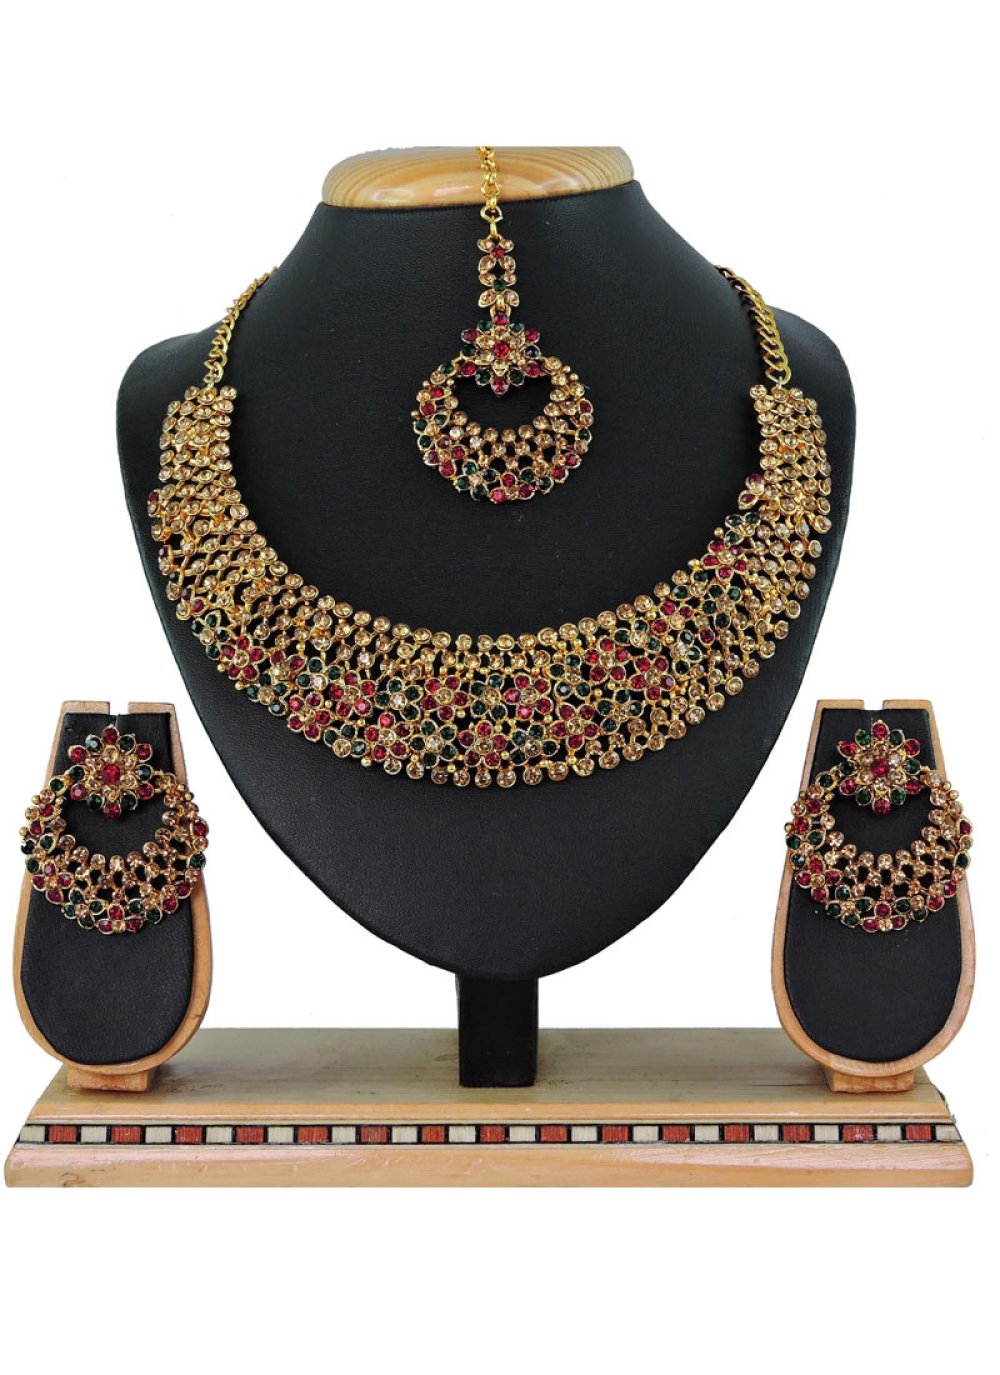 Outstanding Stone Work Gold and Green Gold Rodium Polish Necklace Set